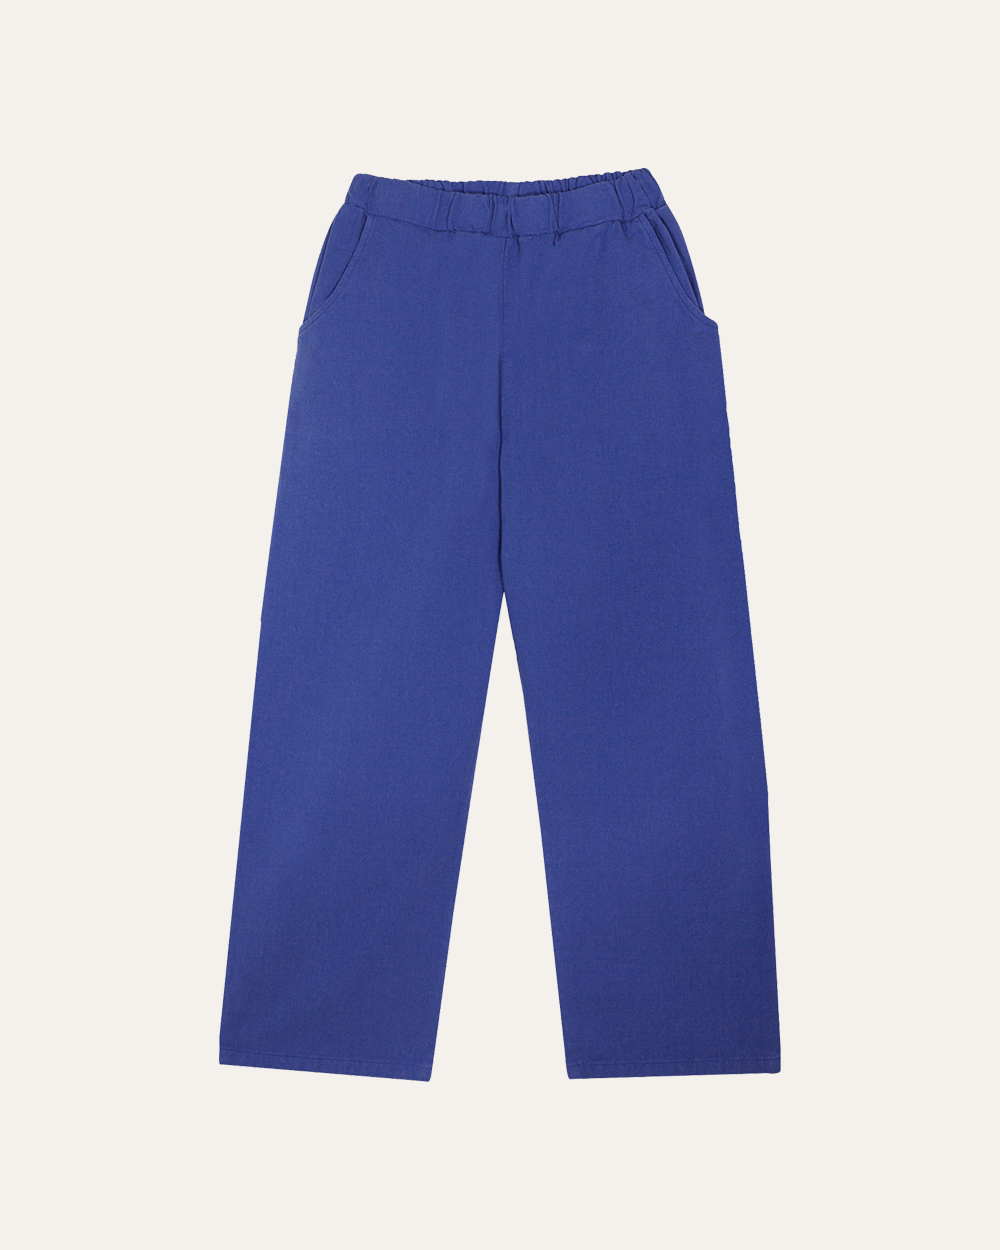 [ THE CAMPAMENTO ] BLUE WASHED TROUSERS [9-10Y]